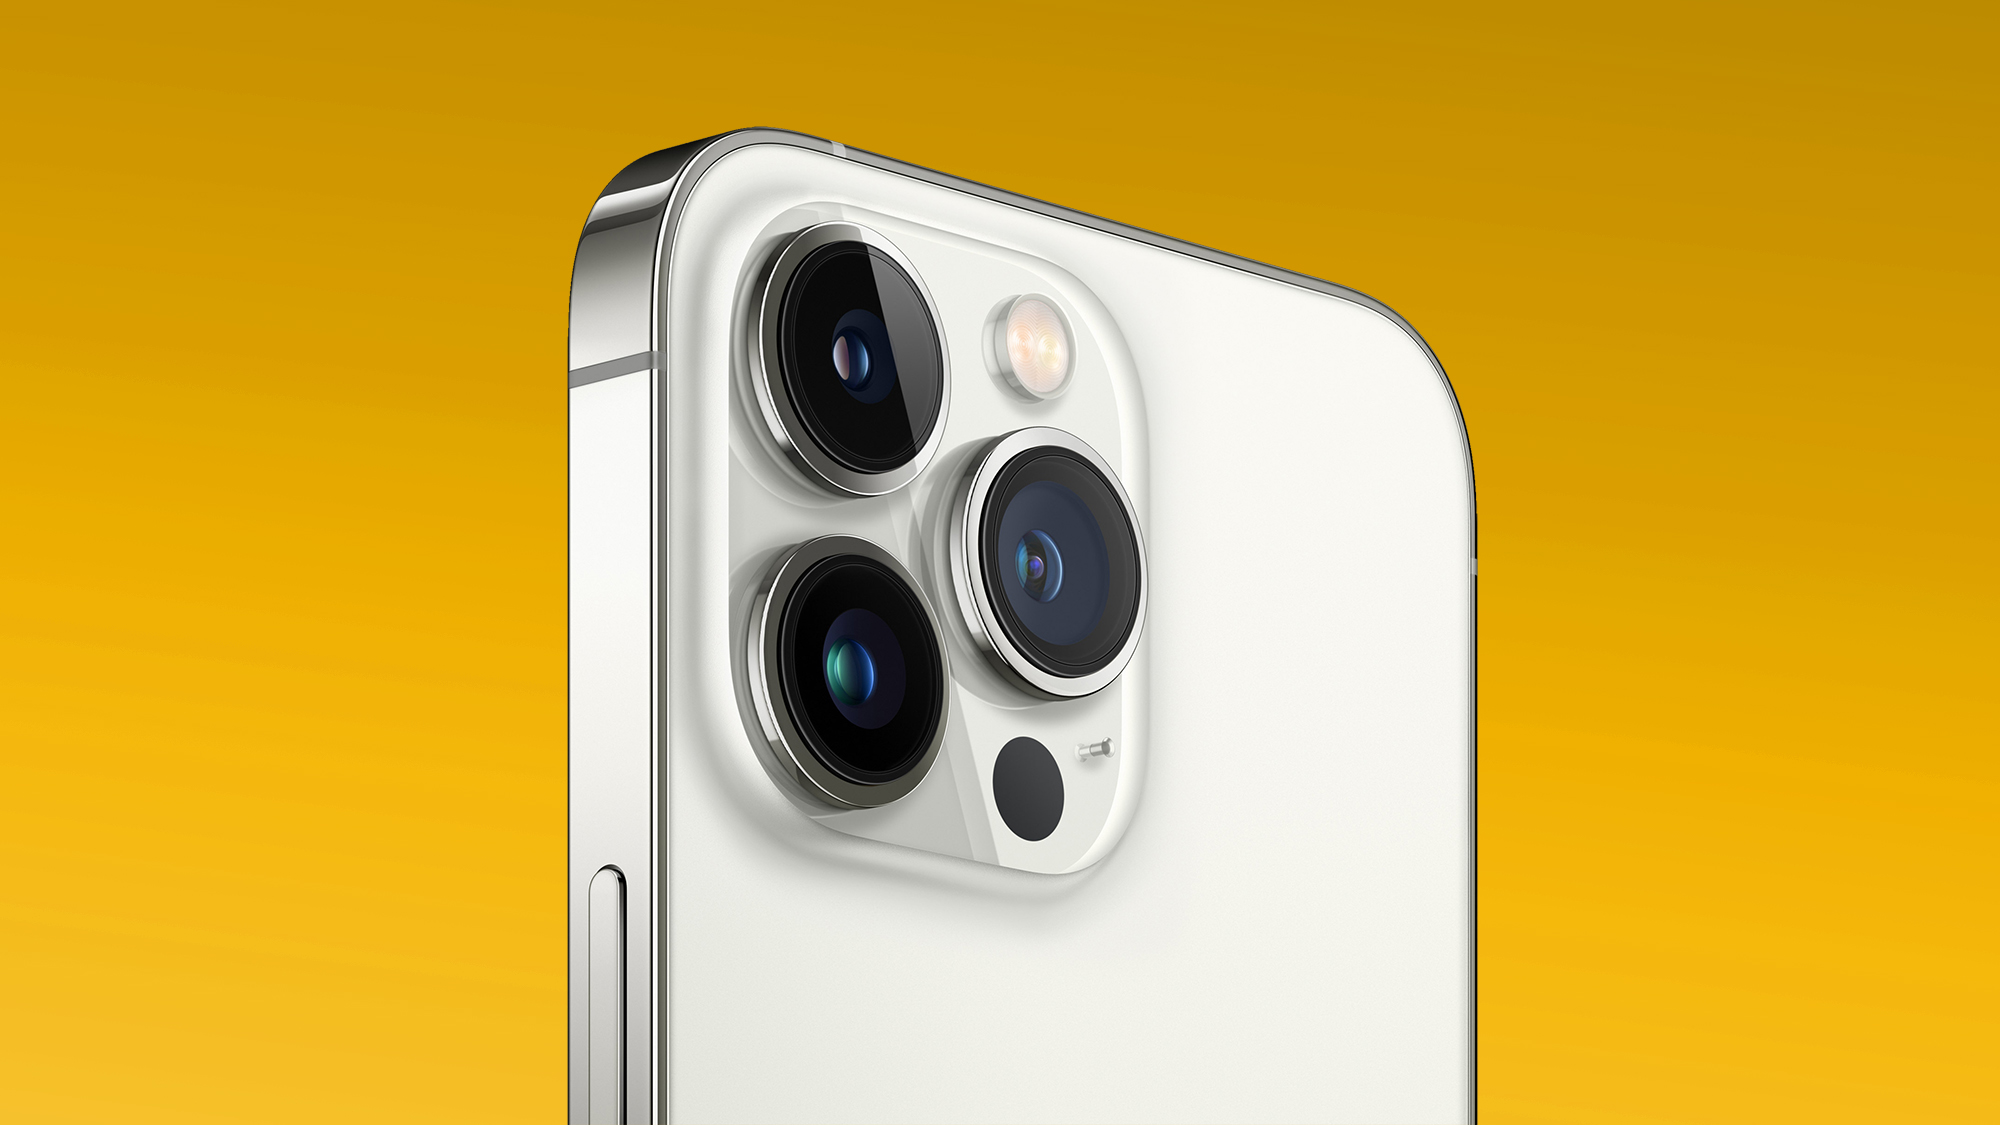 iPhone 13 Pro and Pro Max 128GB models lack this major camera upgrade  Tom's Guide